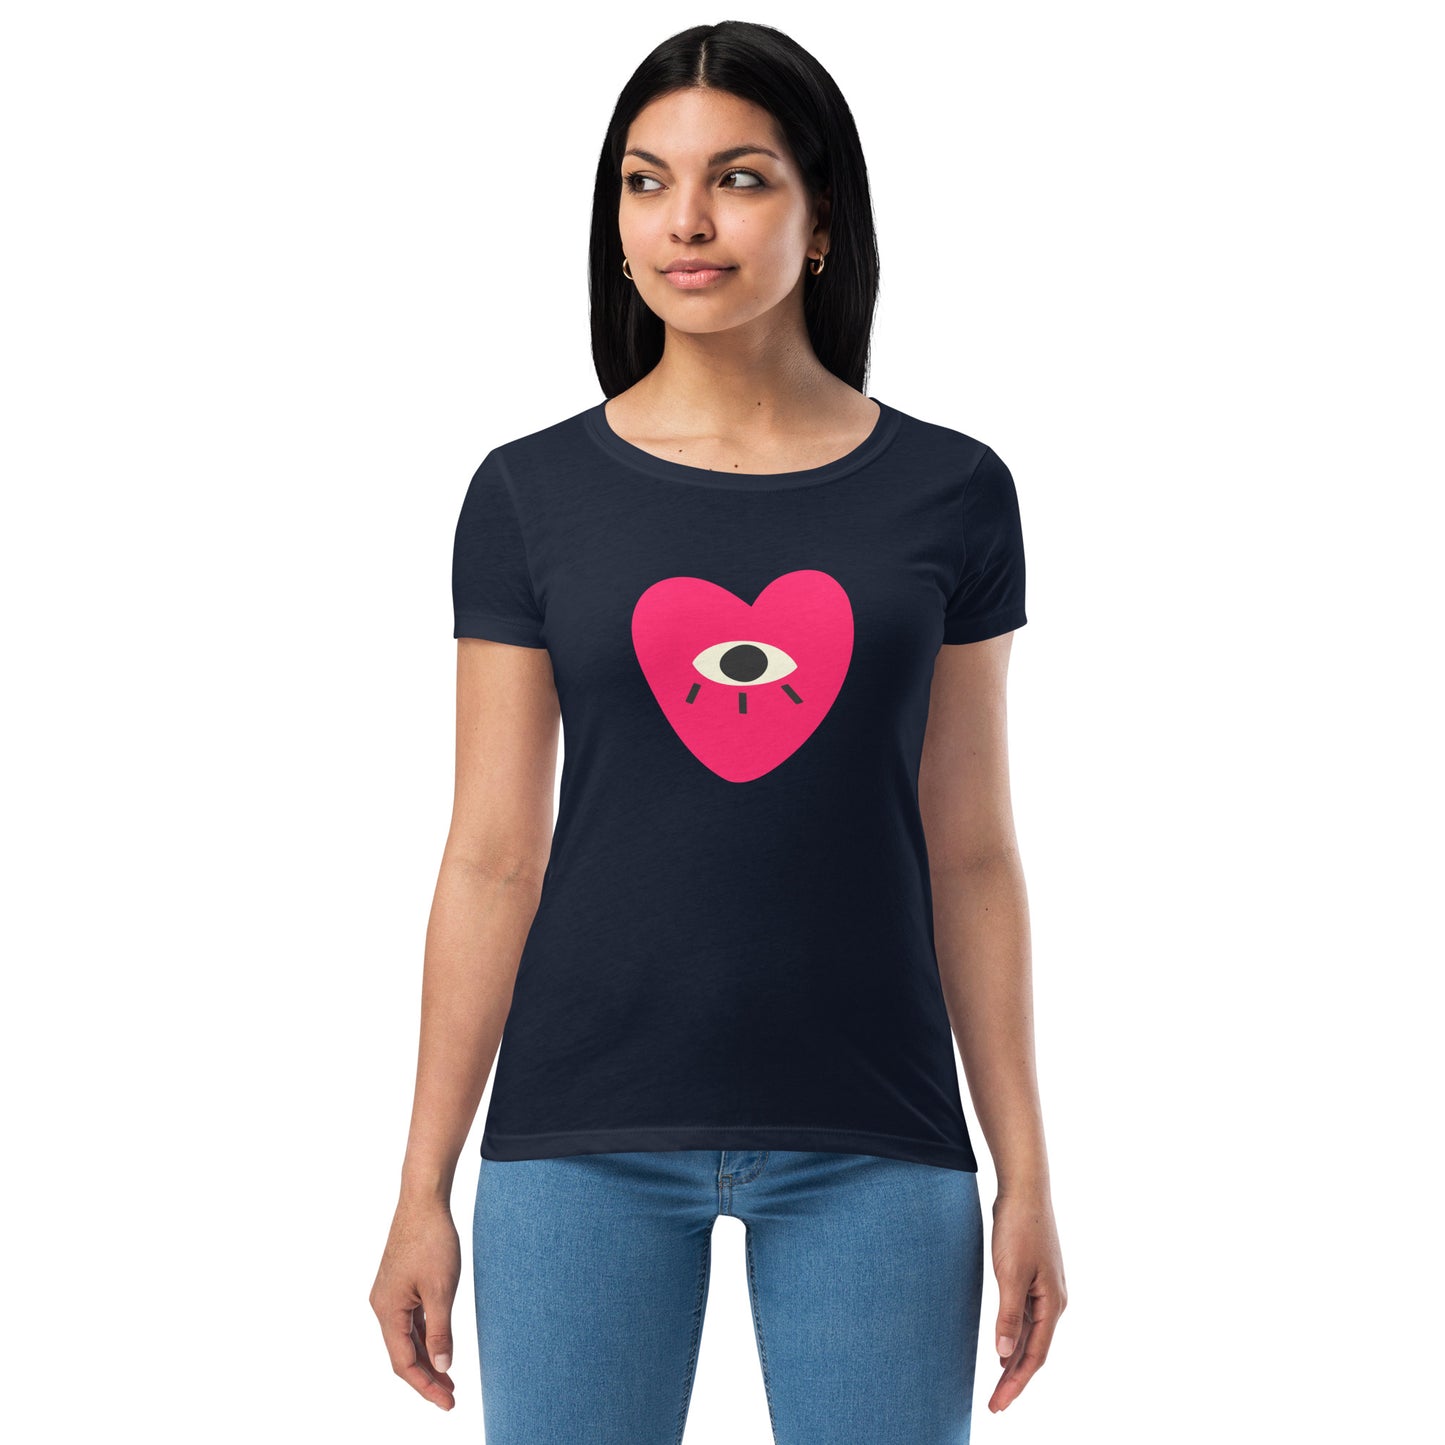 Here's Looking At You Women’s Fitted T-Shirt